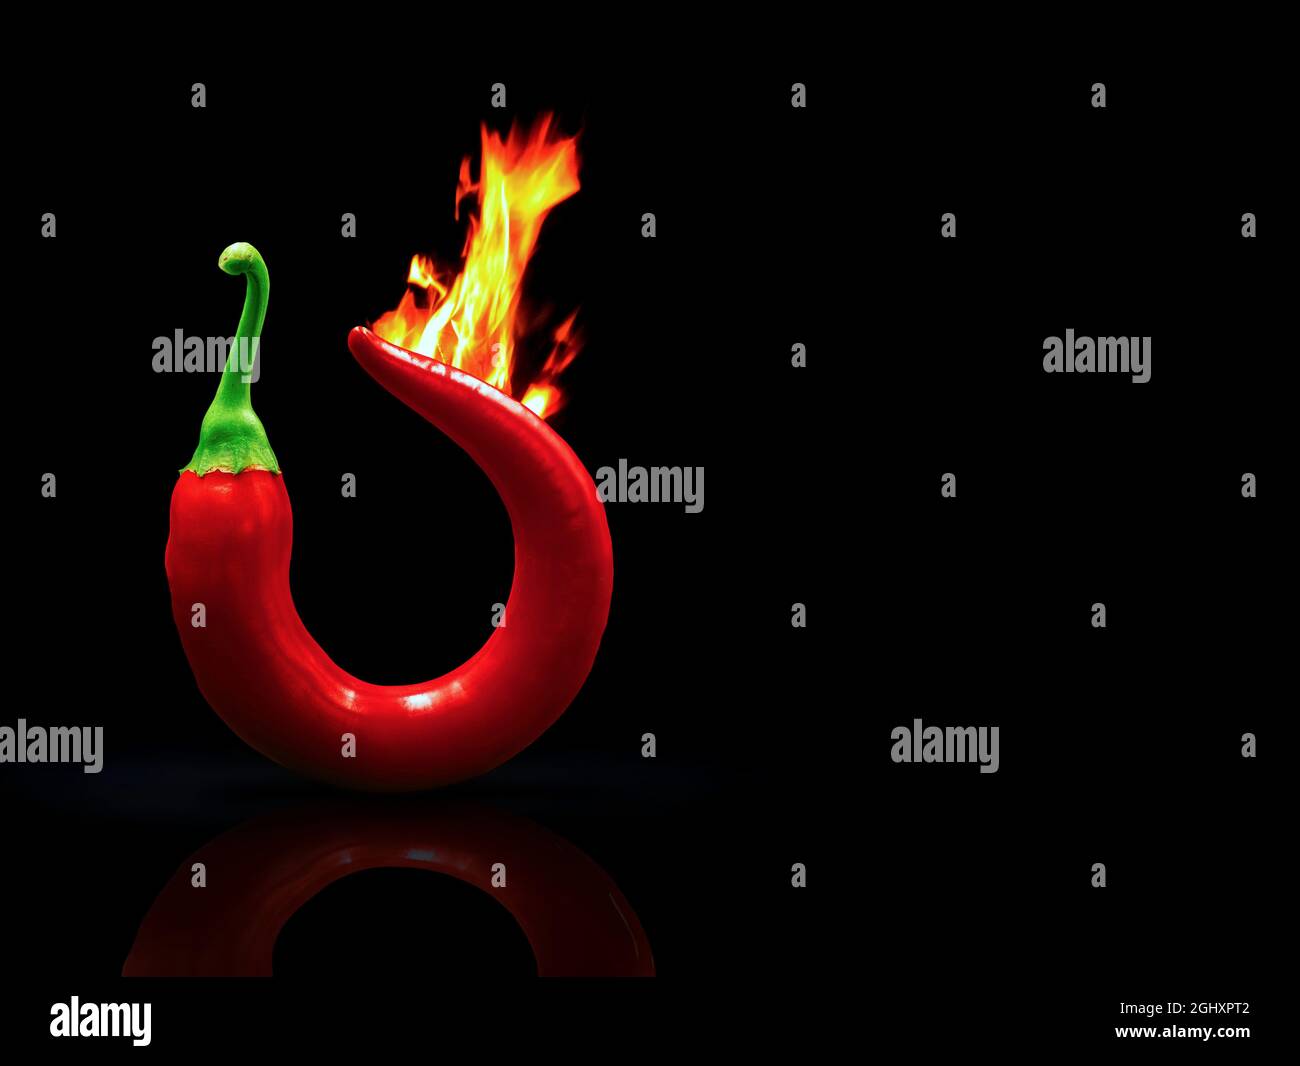 Burning red hot chili pepper isolated on black background with copy space on right side Stock Photo